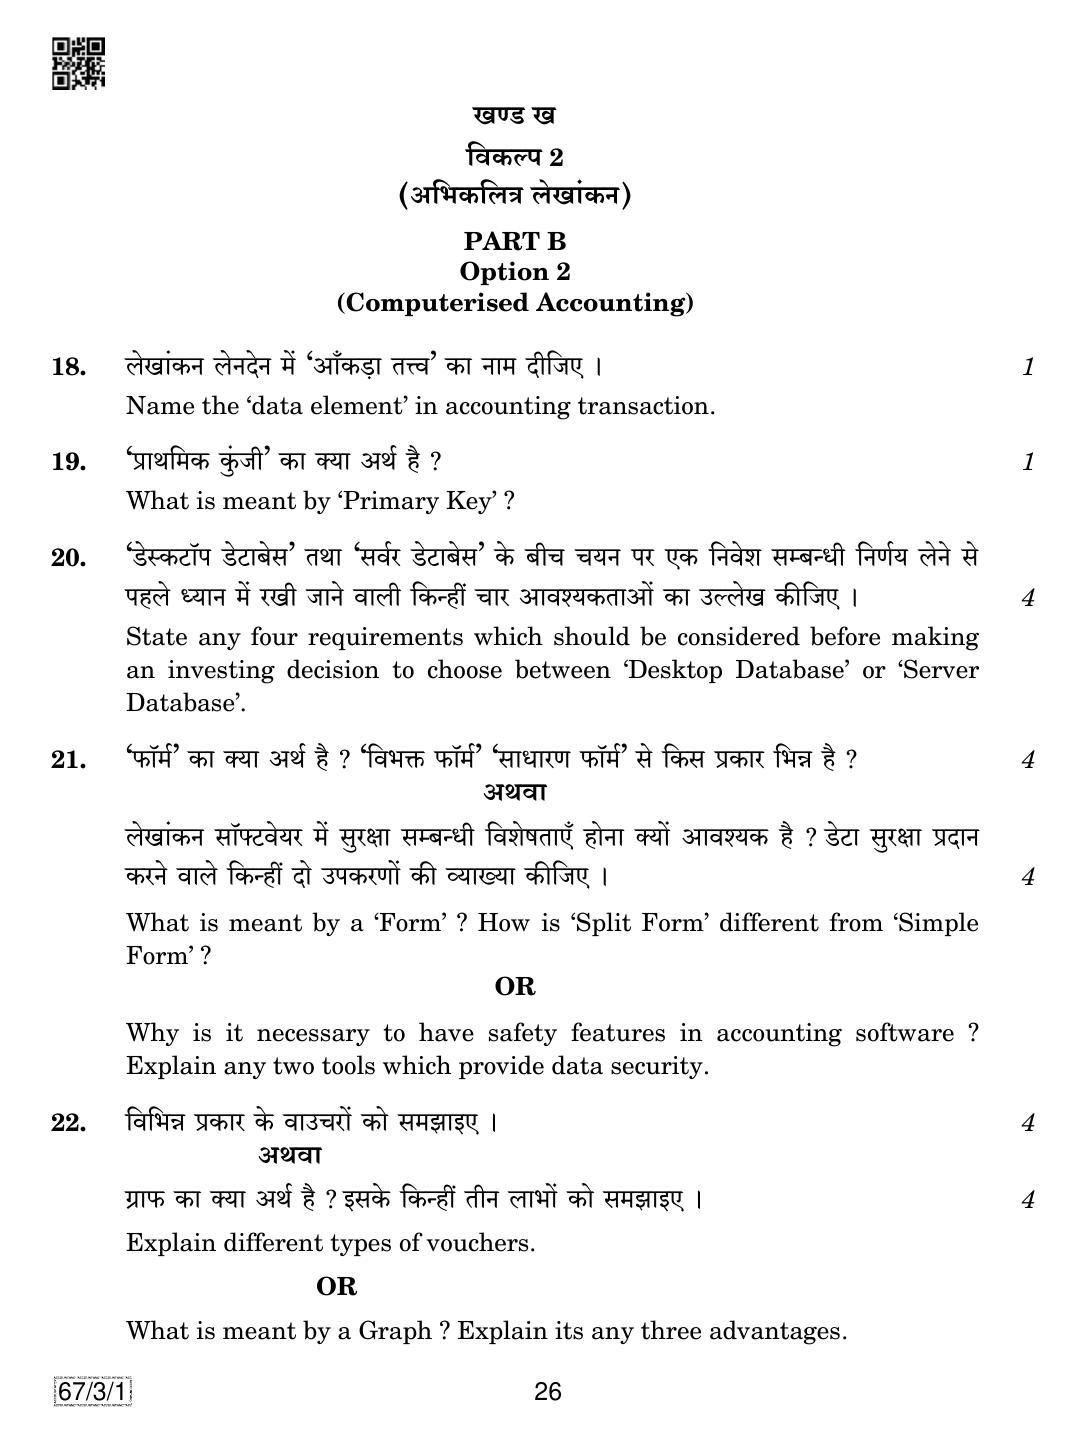 CBSE Class 12 67-3-1 Accountancy 2019 Question Paper - Page 26